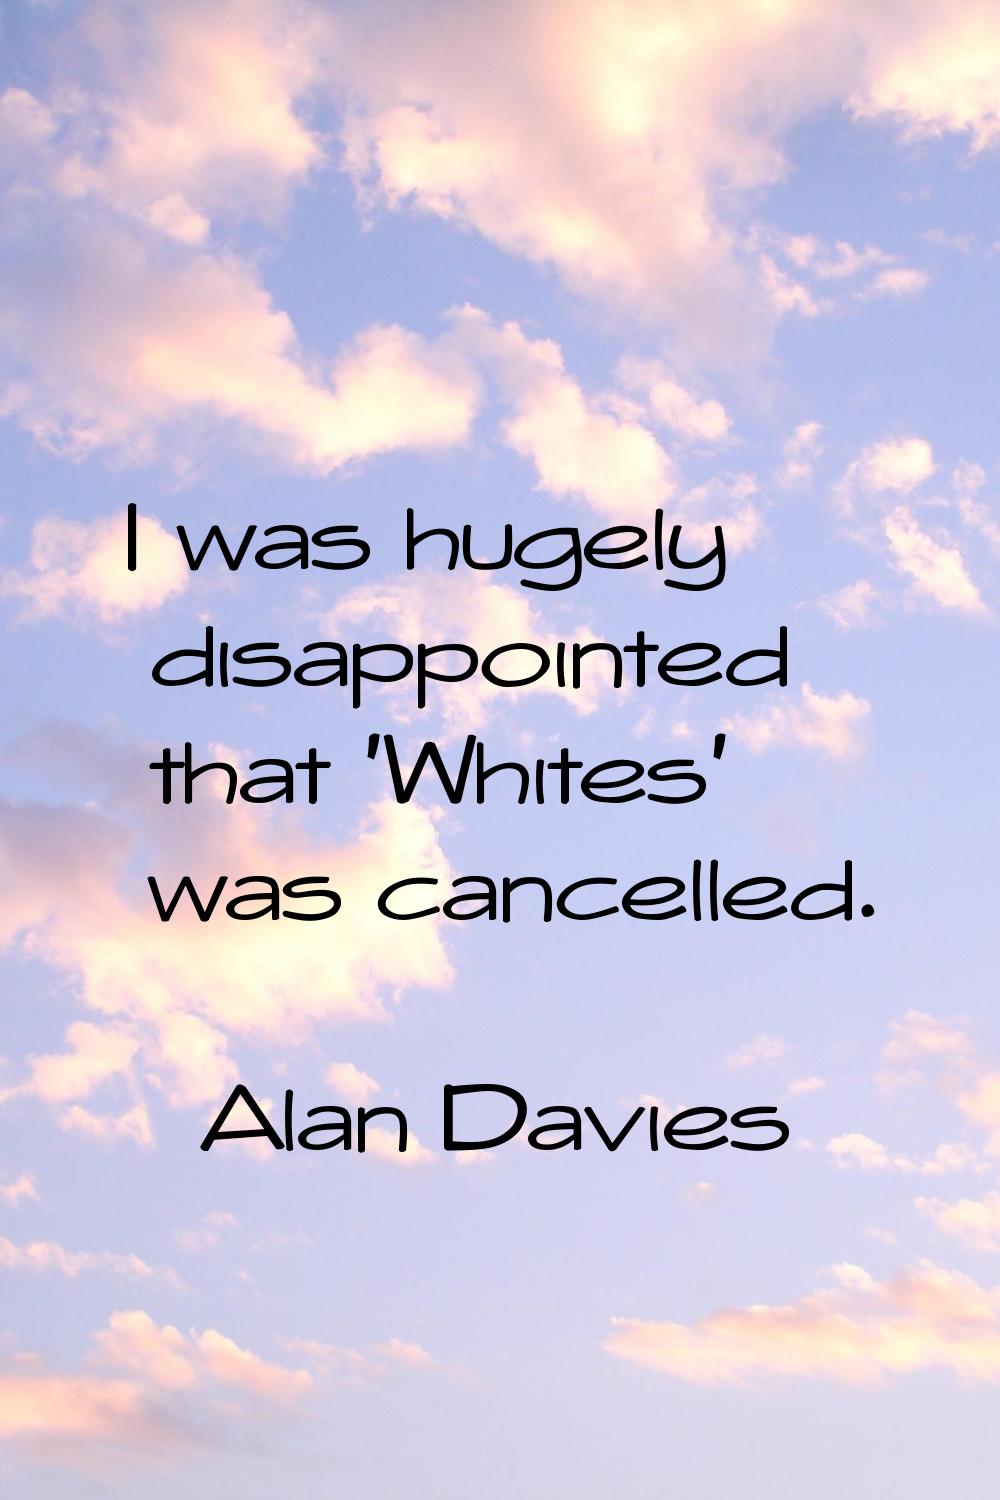 I was hugely disappointed that 'Whites' was cancelled.